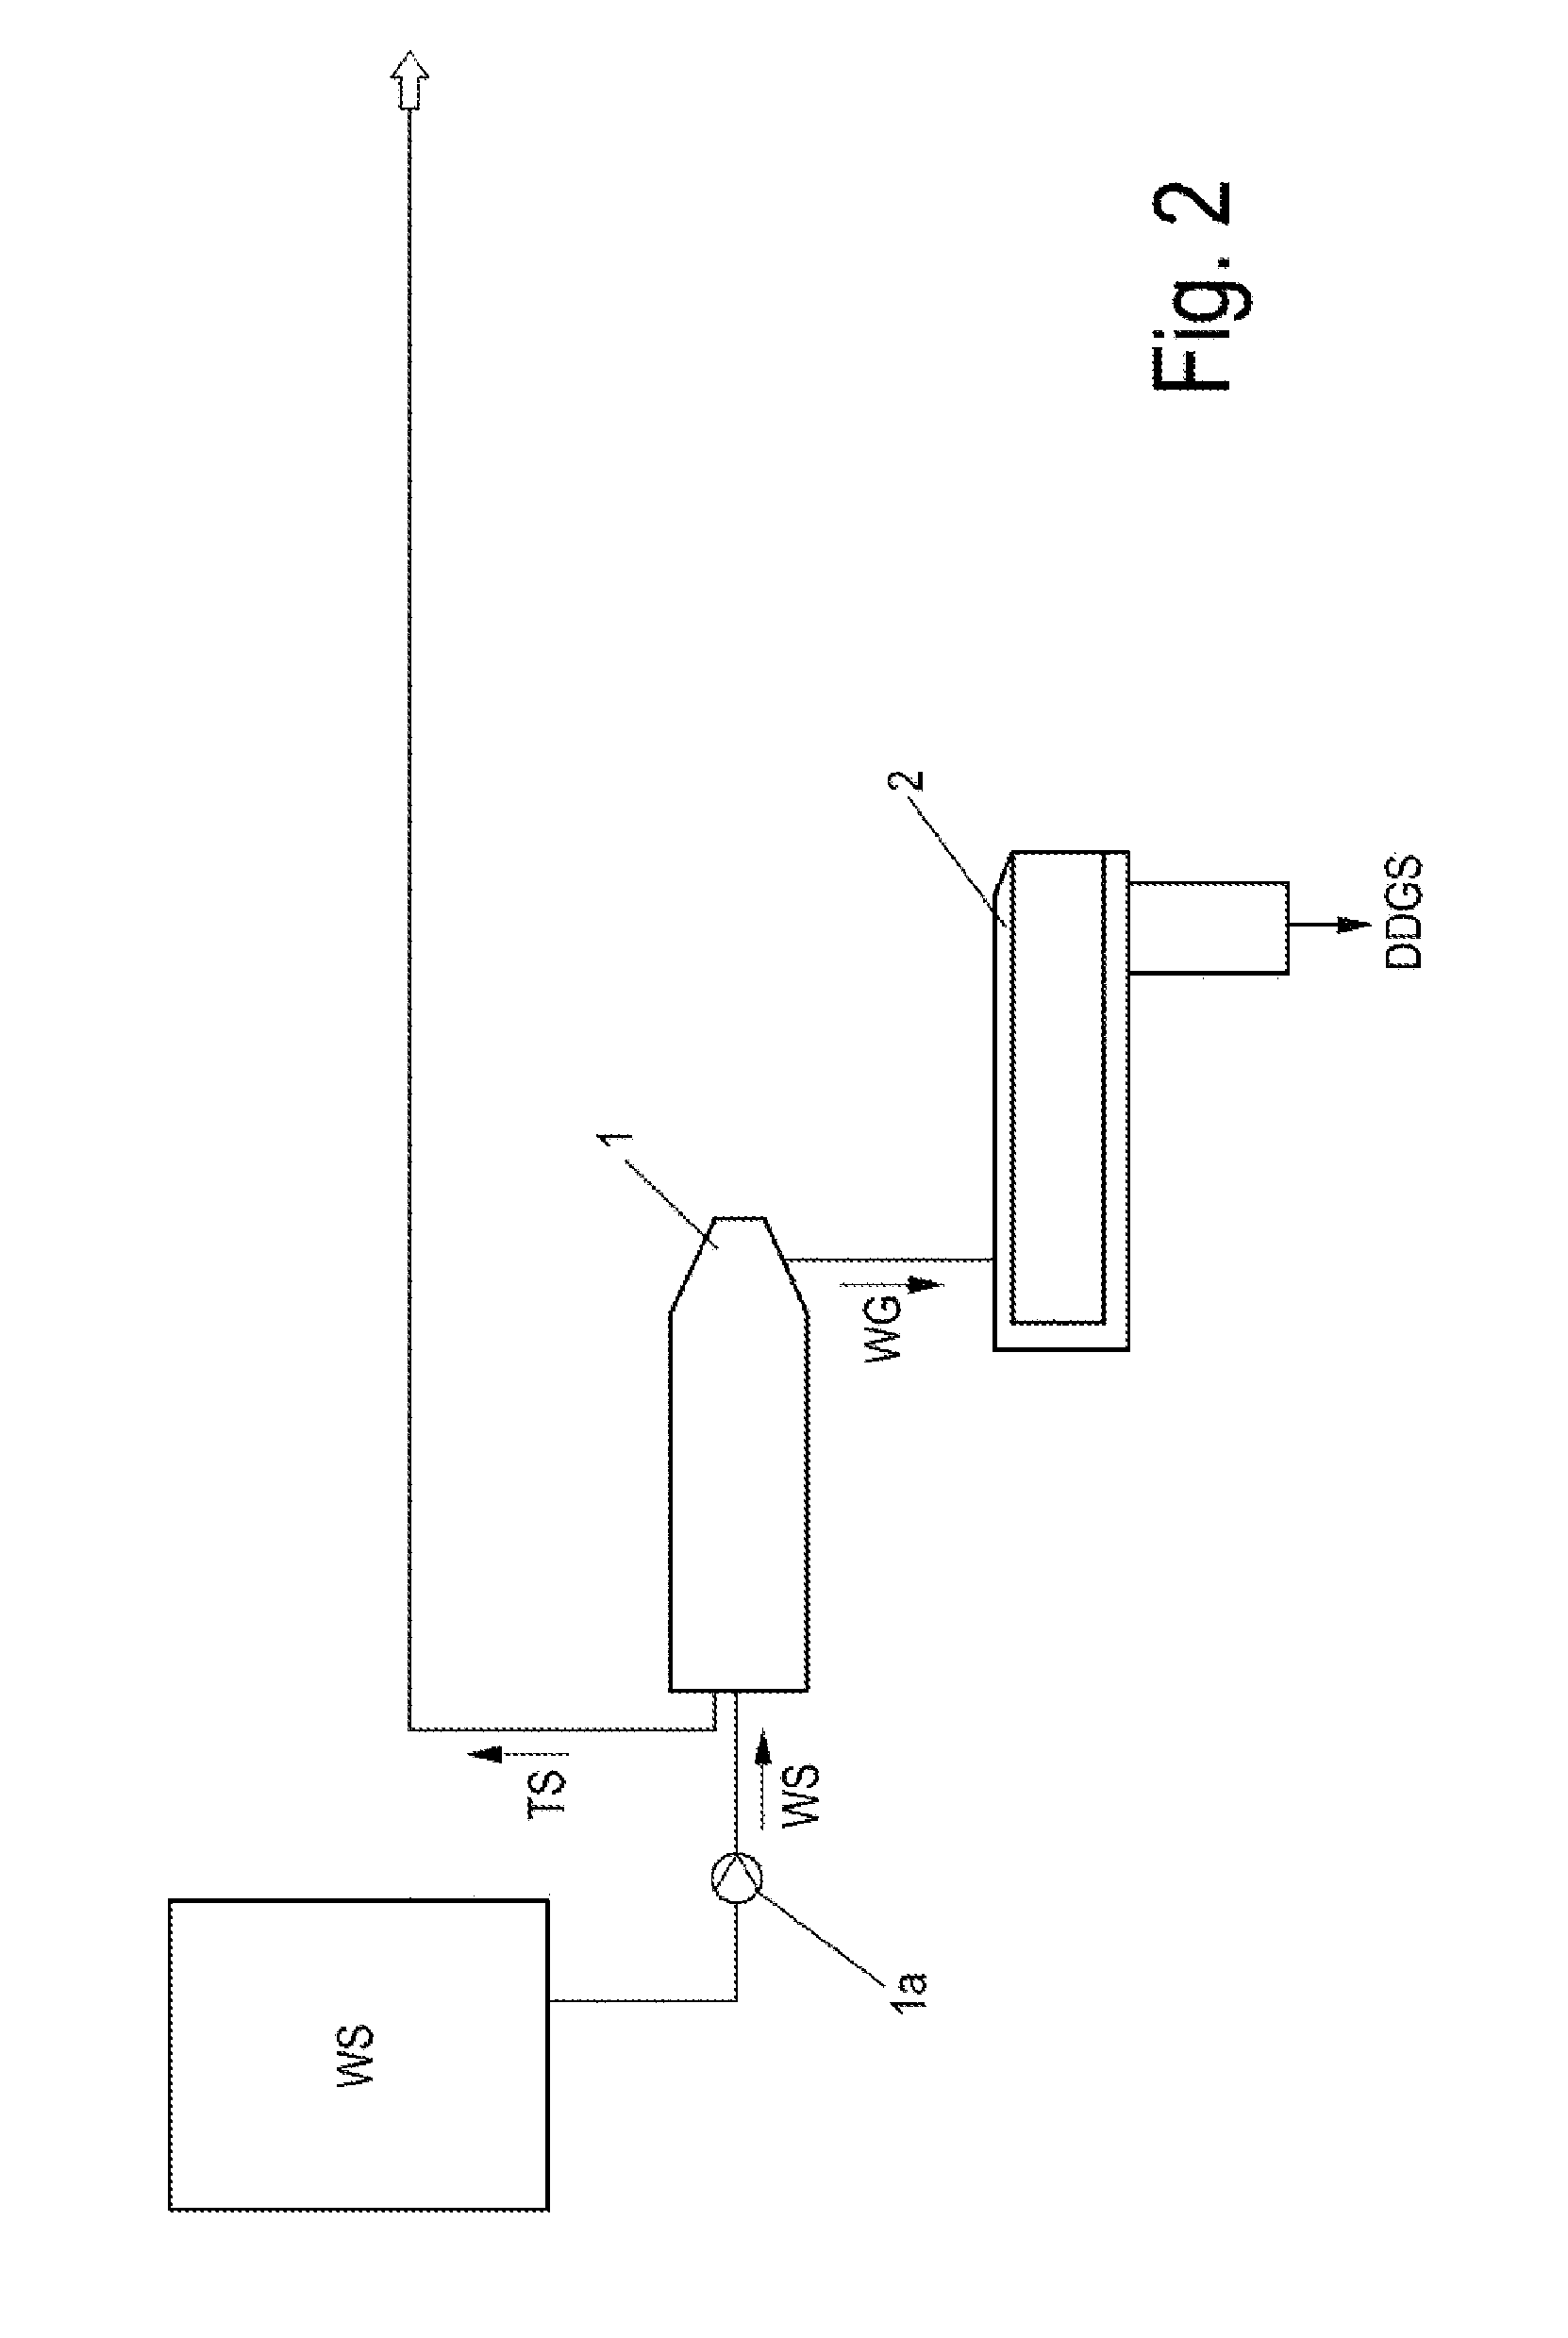 Method for Processing Thin Stillage and Apparatus for Producing a Protein Containing Product